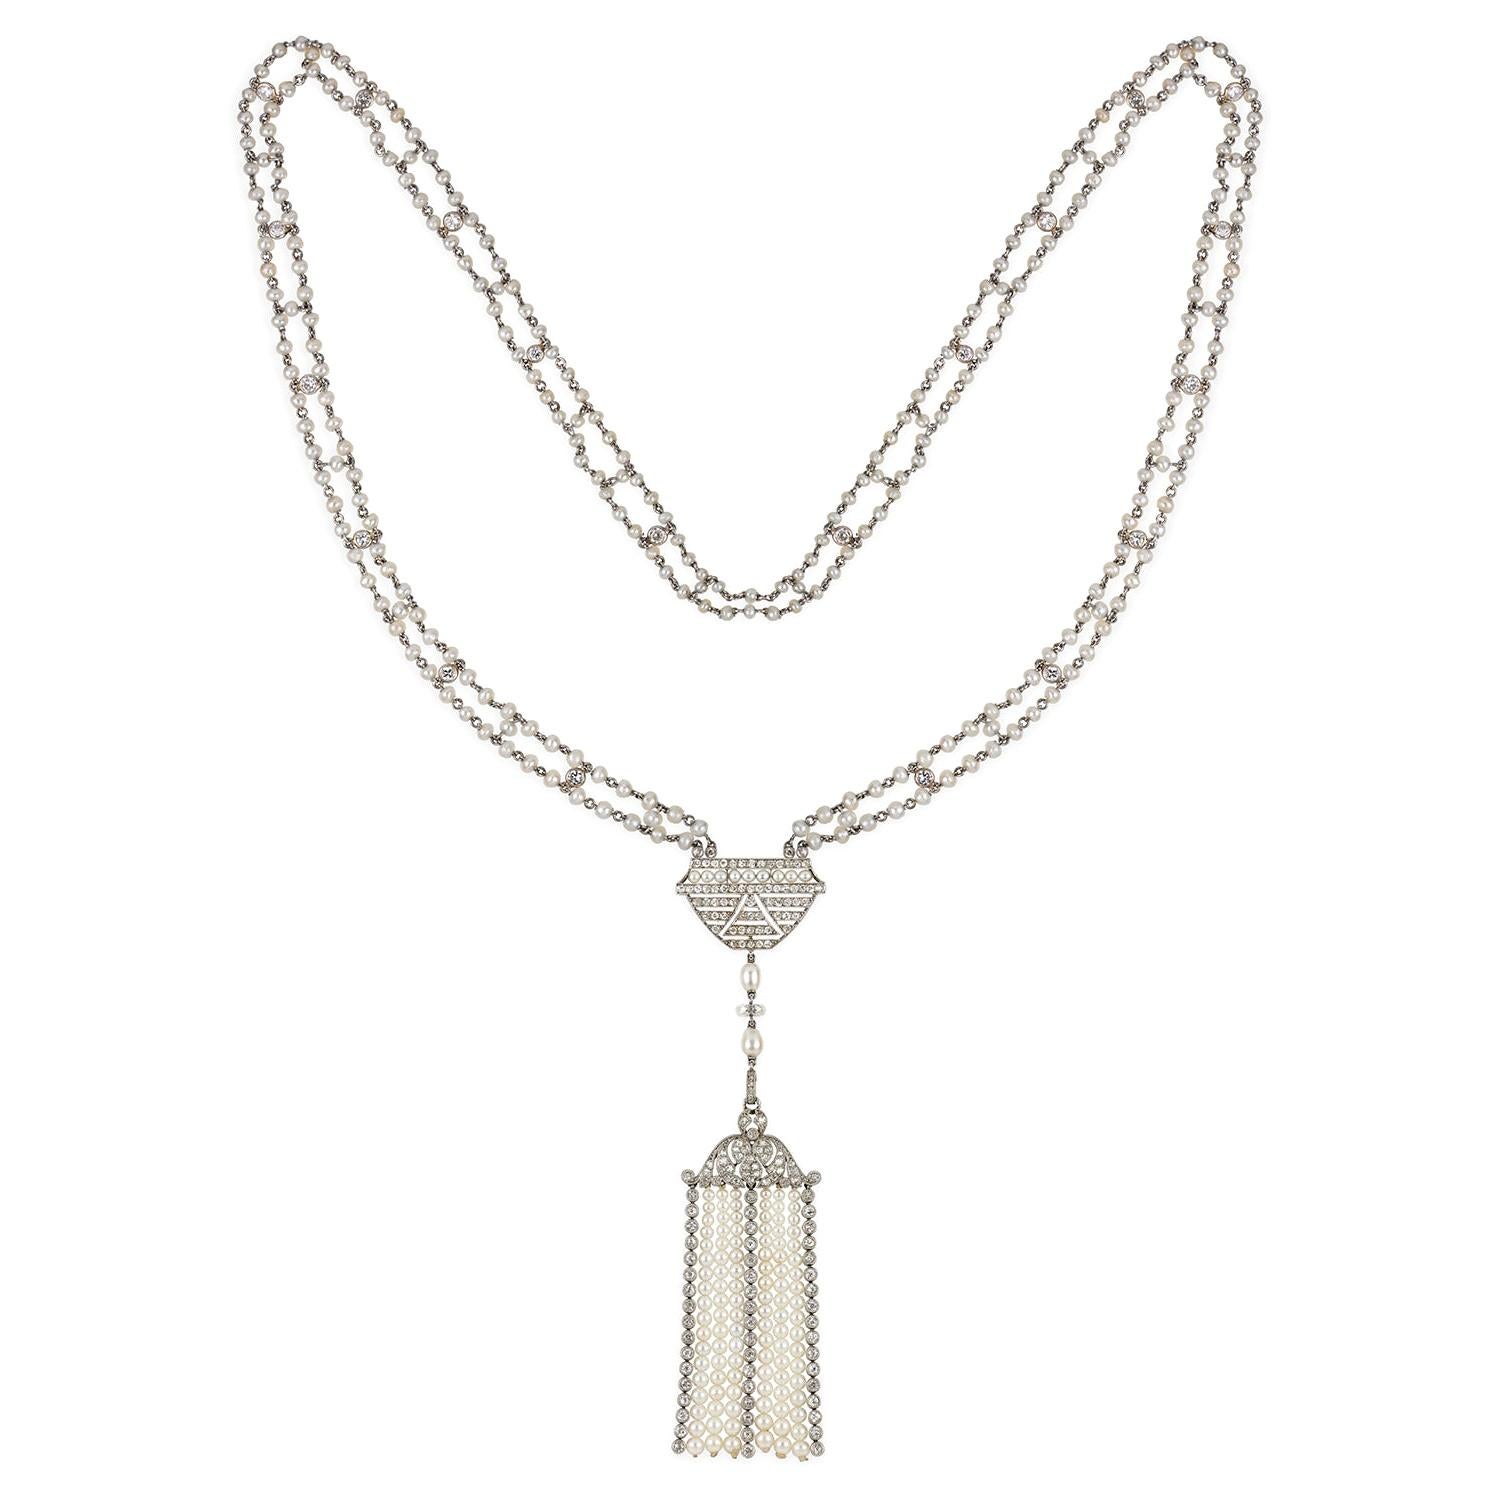 Belle Epoque Natural Pearl and Diamond Sautoir Necklace